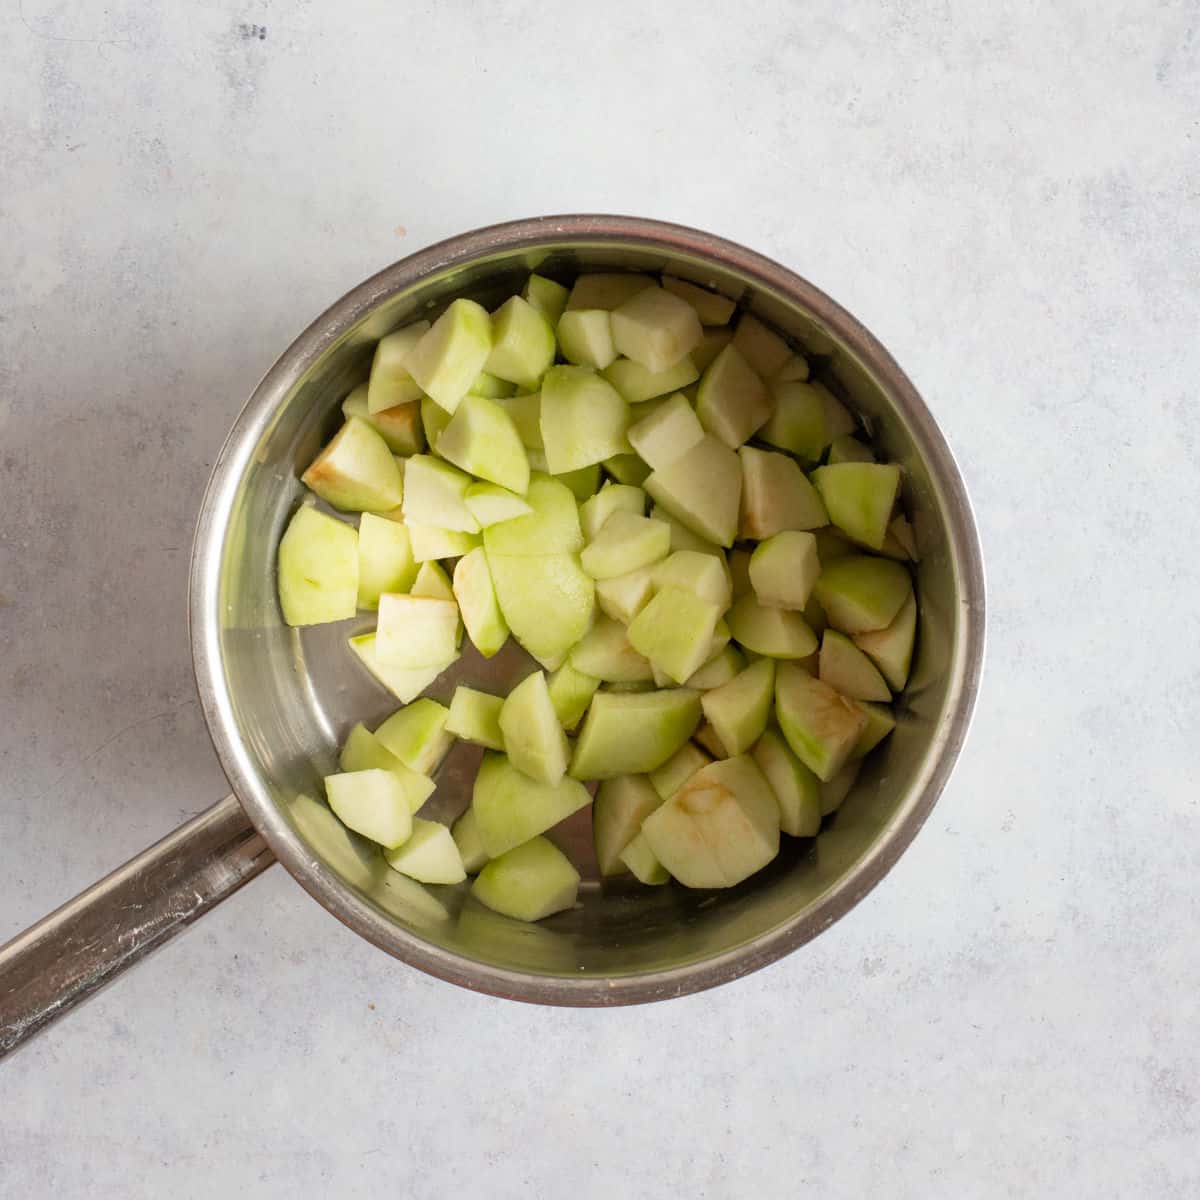 Chopped Bramley apples in a pan.